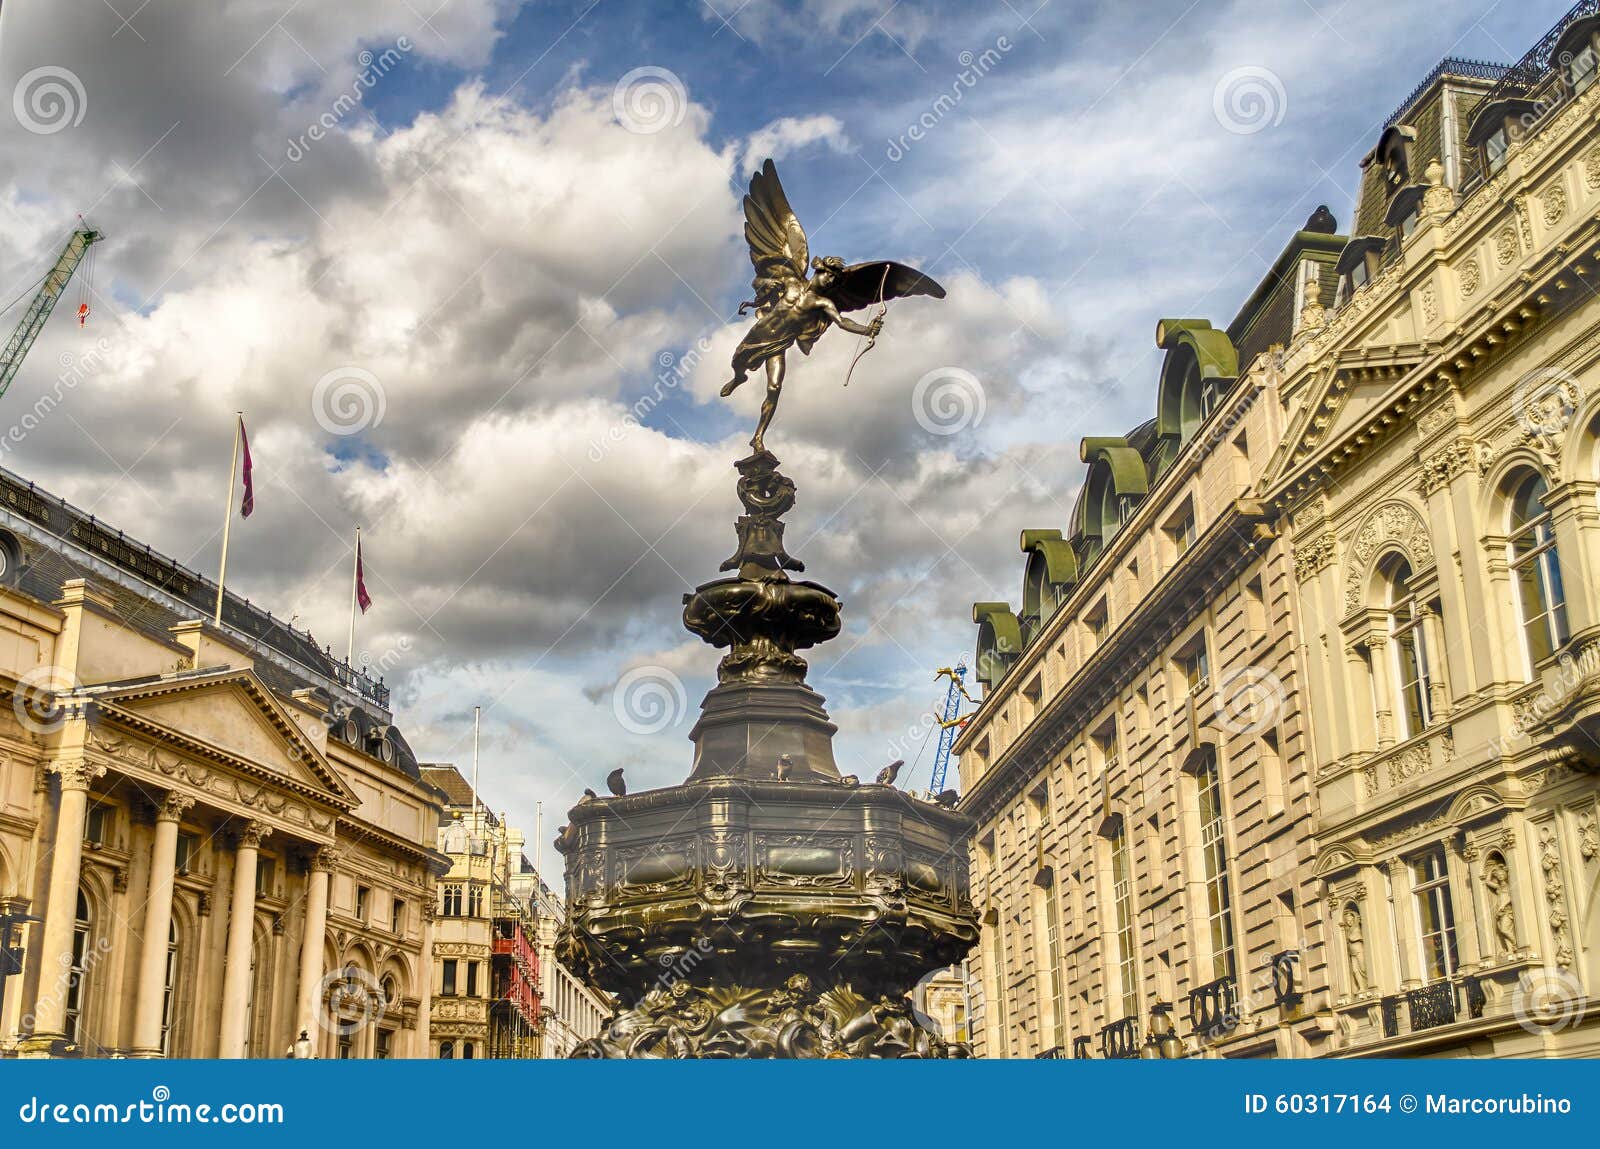 eros statue at piccadilly circus, london